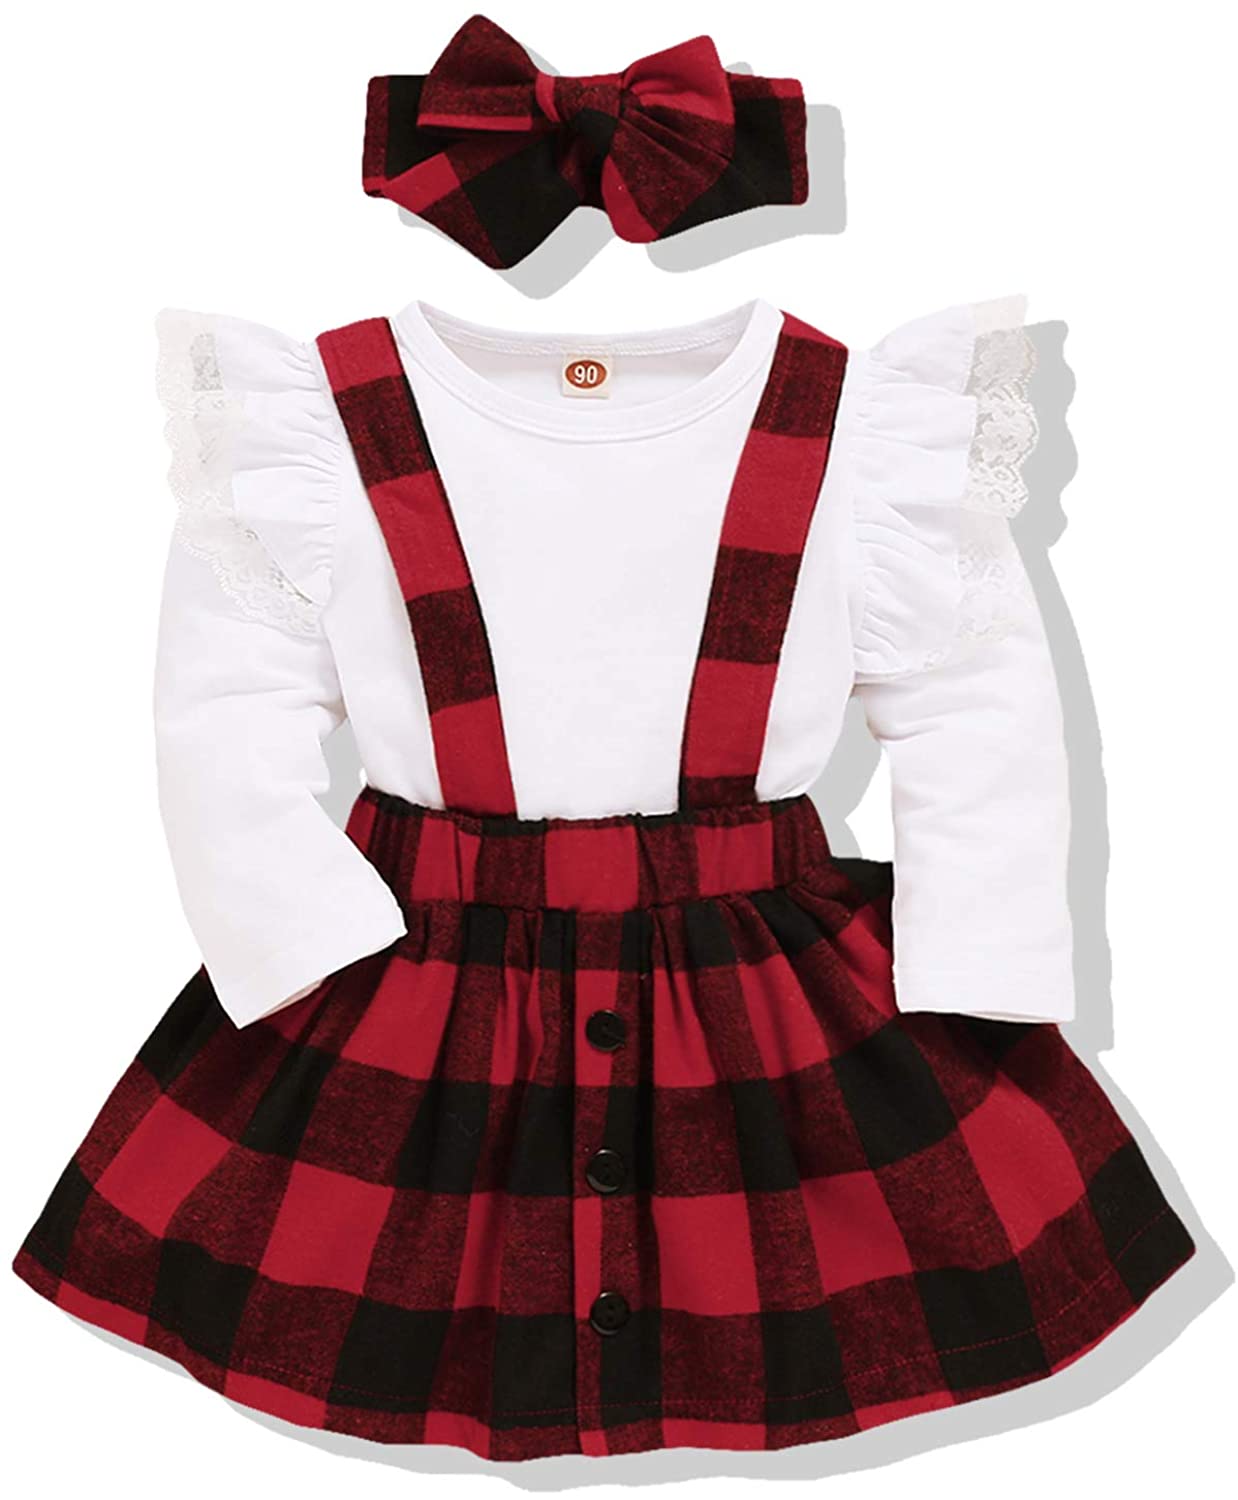 Toddler Kids Baby Girl Outfits Set Thanksgiving Long Sleeve T Shirt Plaid Suspender Skirt Outfits Set 1-5Years Olds 